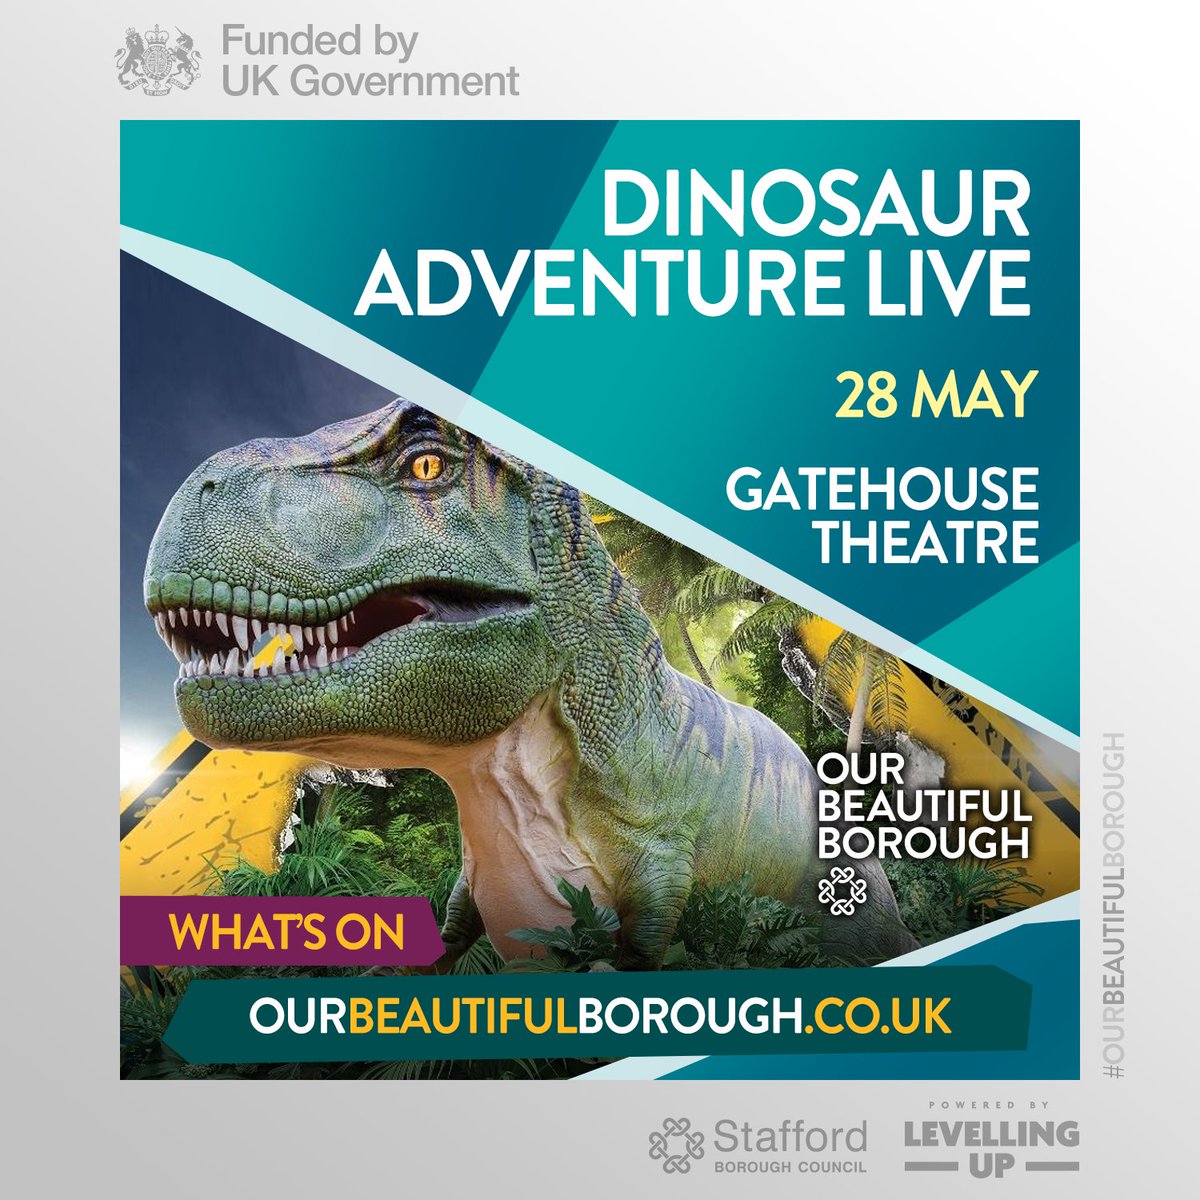 Dinosaur Adventure Live is back and even more ROARSOME! Join the brave Rangers for another action packed #Dinosaur #Adventure in a new exciting show 'Trouble On Volcano Island' at @Staff_Gatehouse on Tuesday 28 May: tinyurl.com/54wm97yd #DaysOut #FamilyFun #OurBeautifulBorough